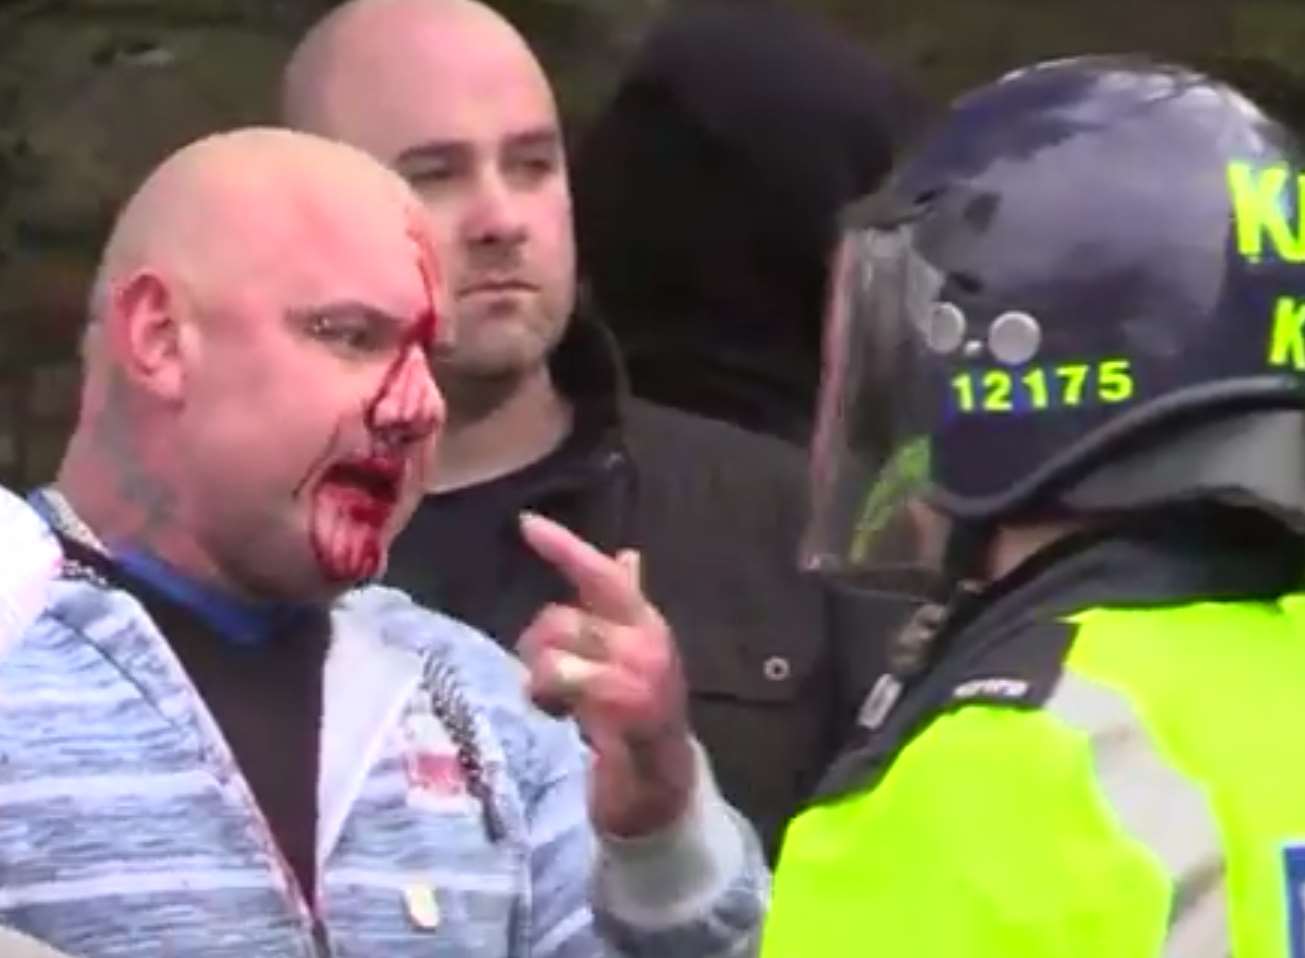 Blood pours down the face of injured man